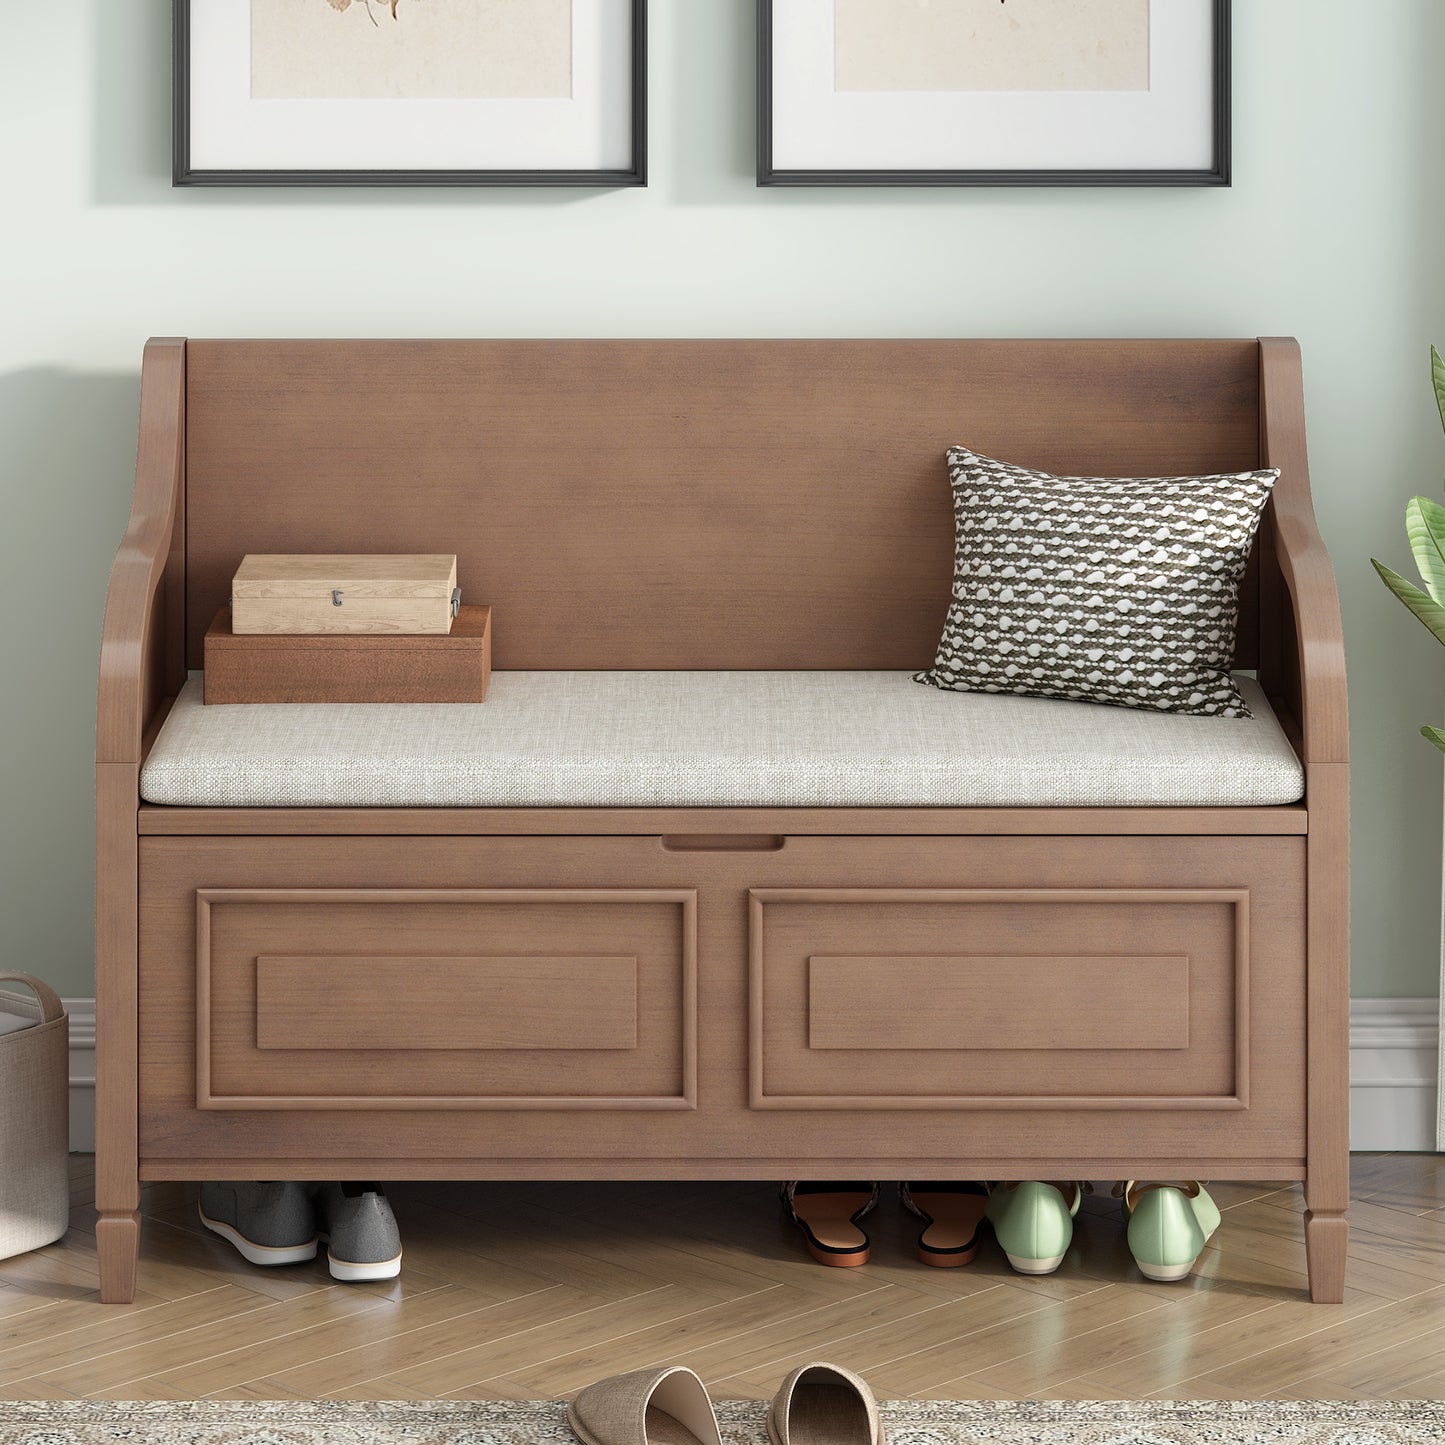 TREXM Rustic Style Solid wood Entryway Multifunctional Storage Bench with Safety Hinge (Brown+ Beige)